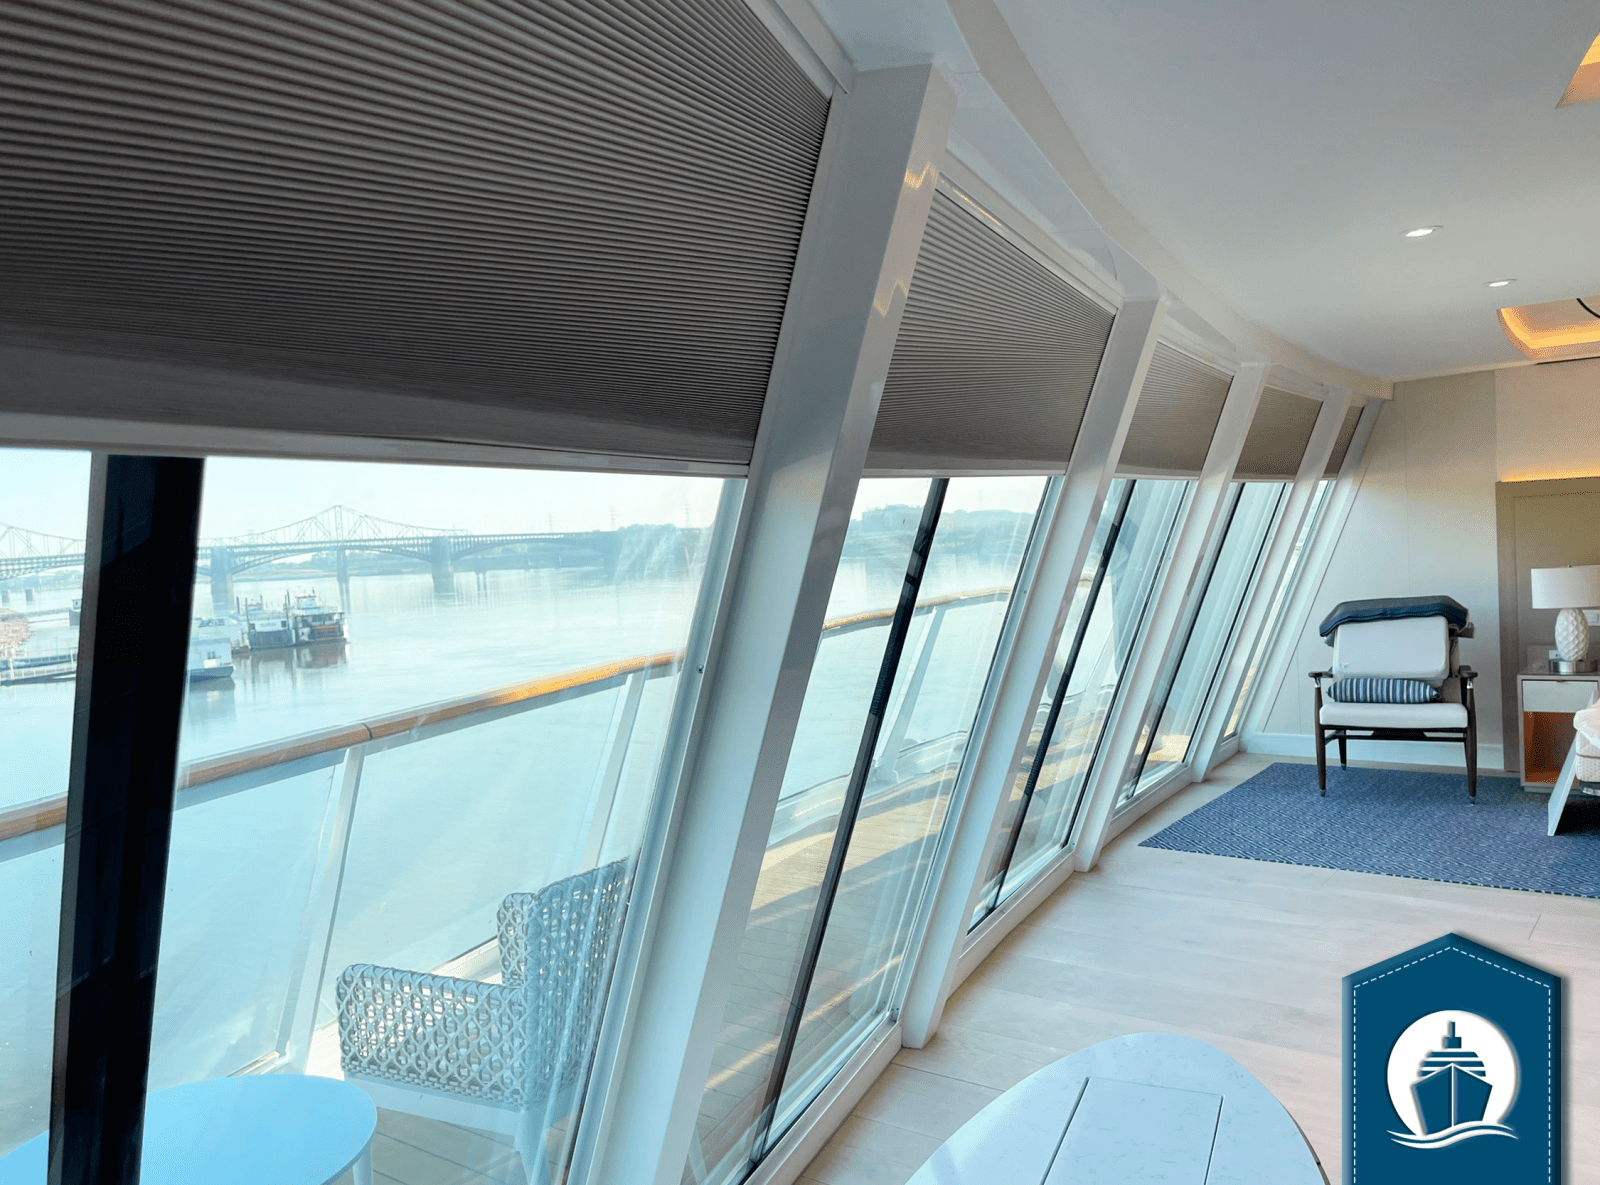 Solarglide free Hanging Pleated blinds onboard cruise liner